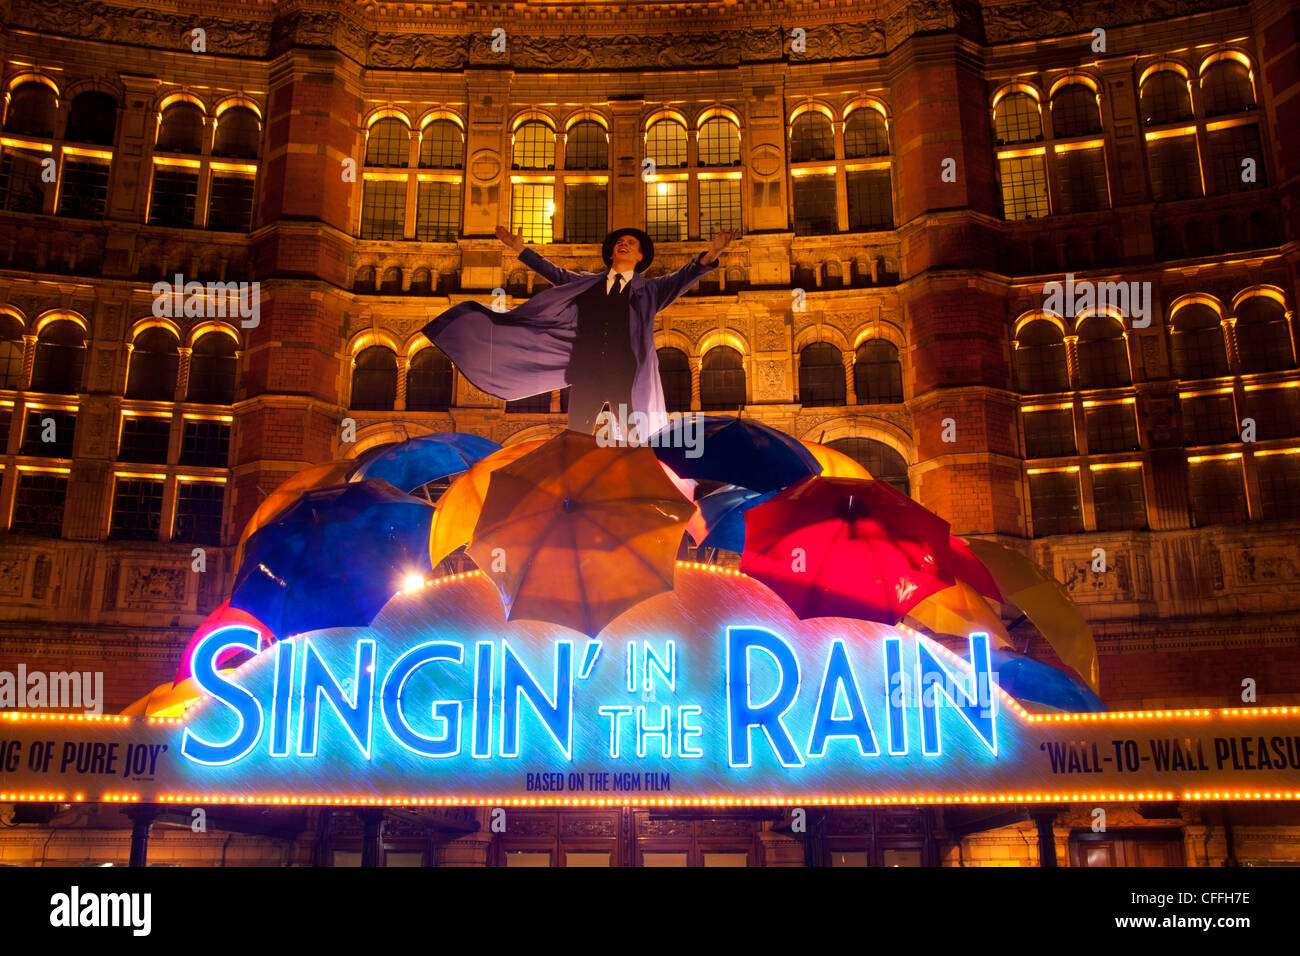 Singin' in the Rain Neon sign and umbrella display advertising musical Palace Theatre West End London England UK Stock Photo